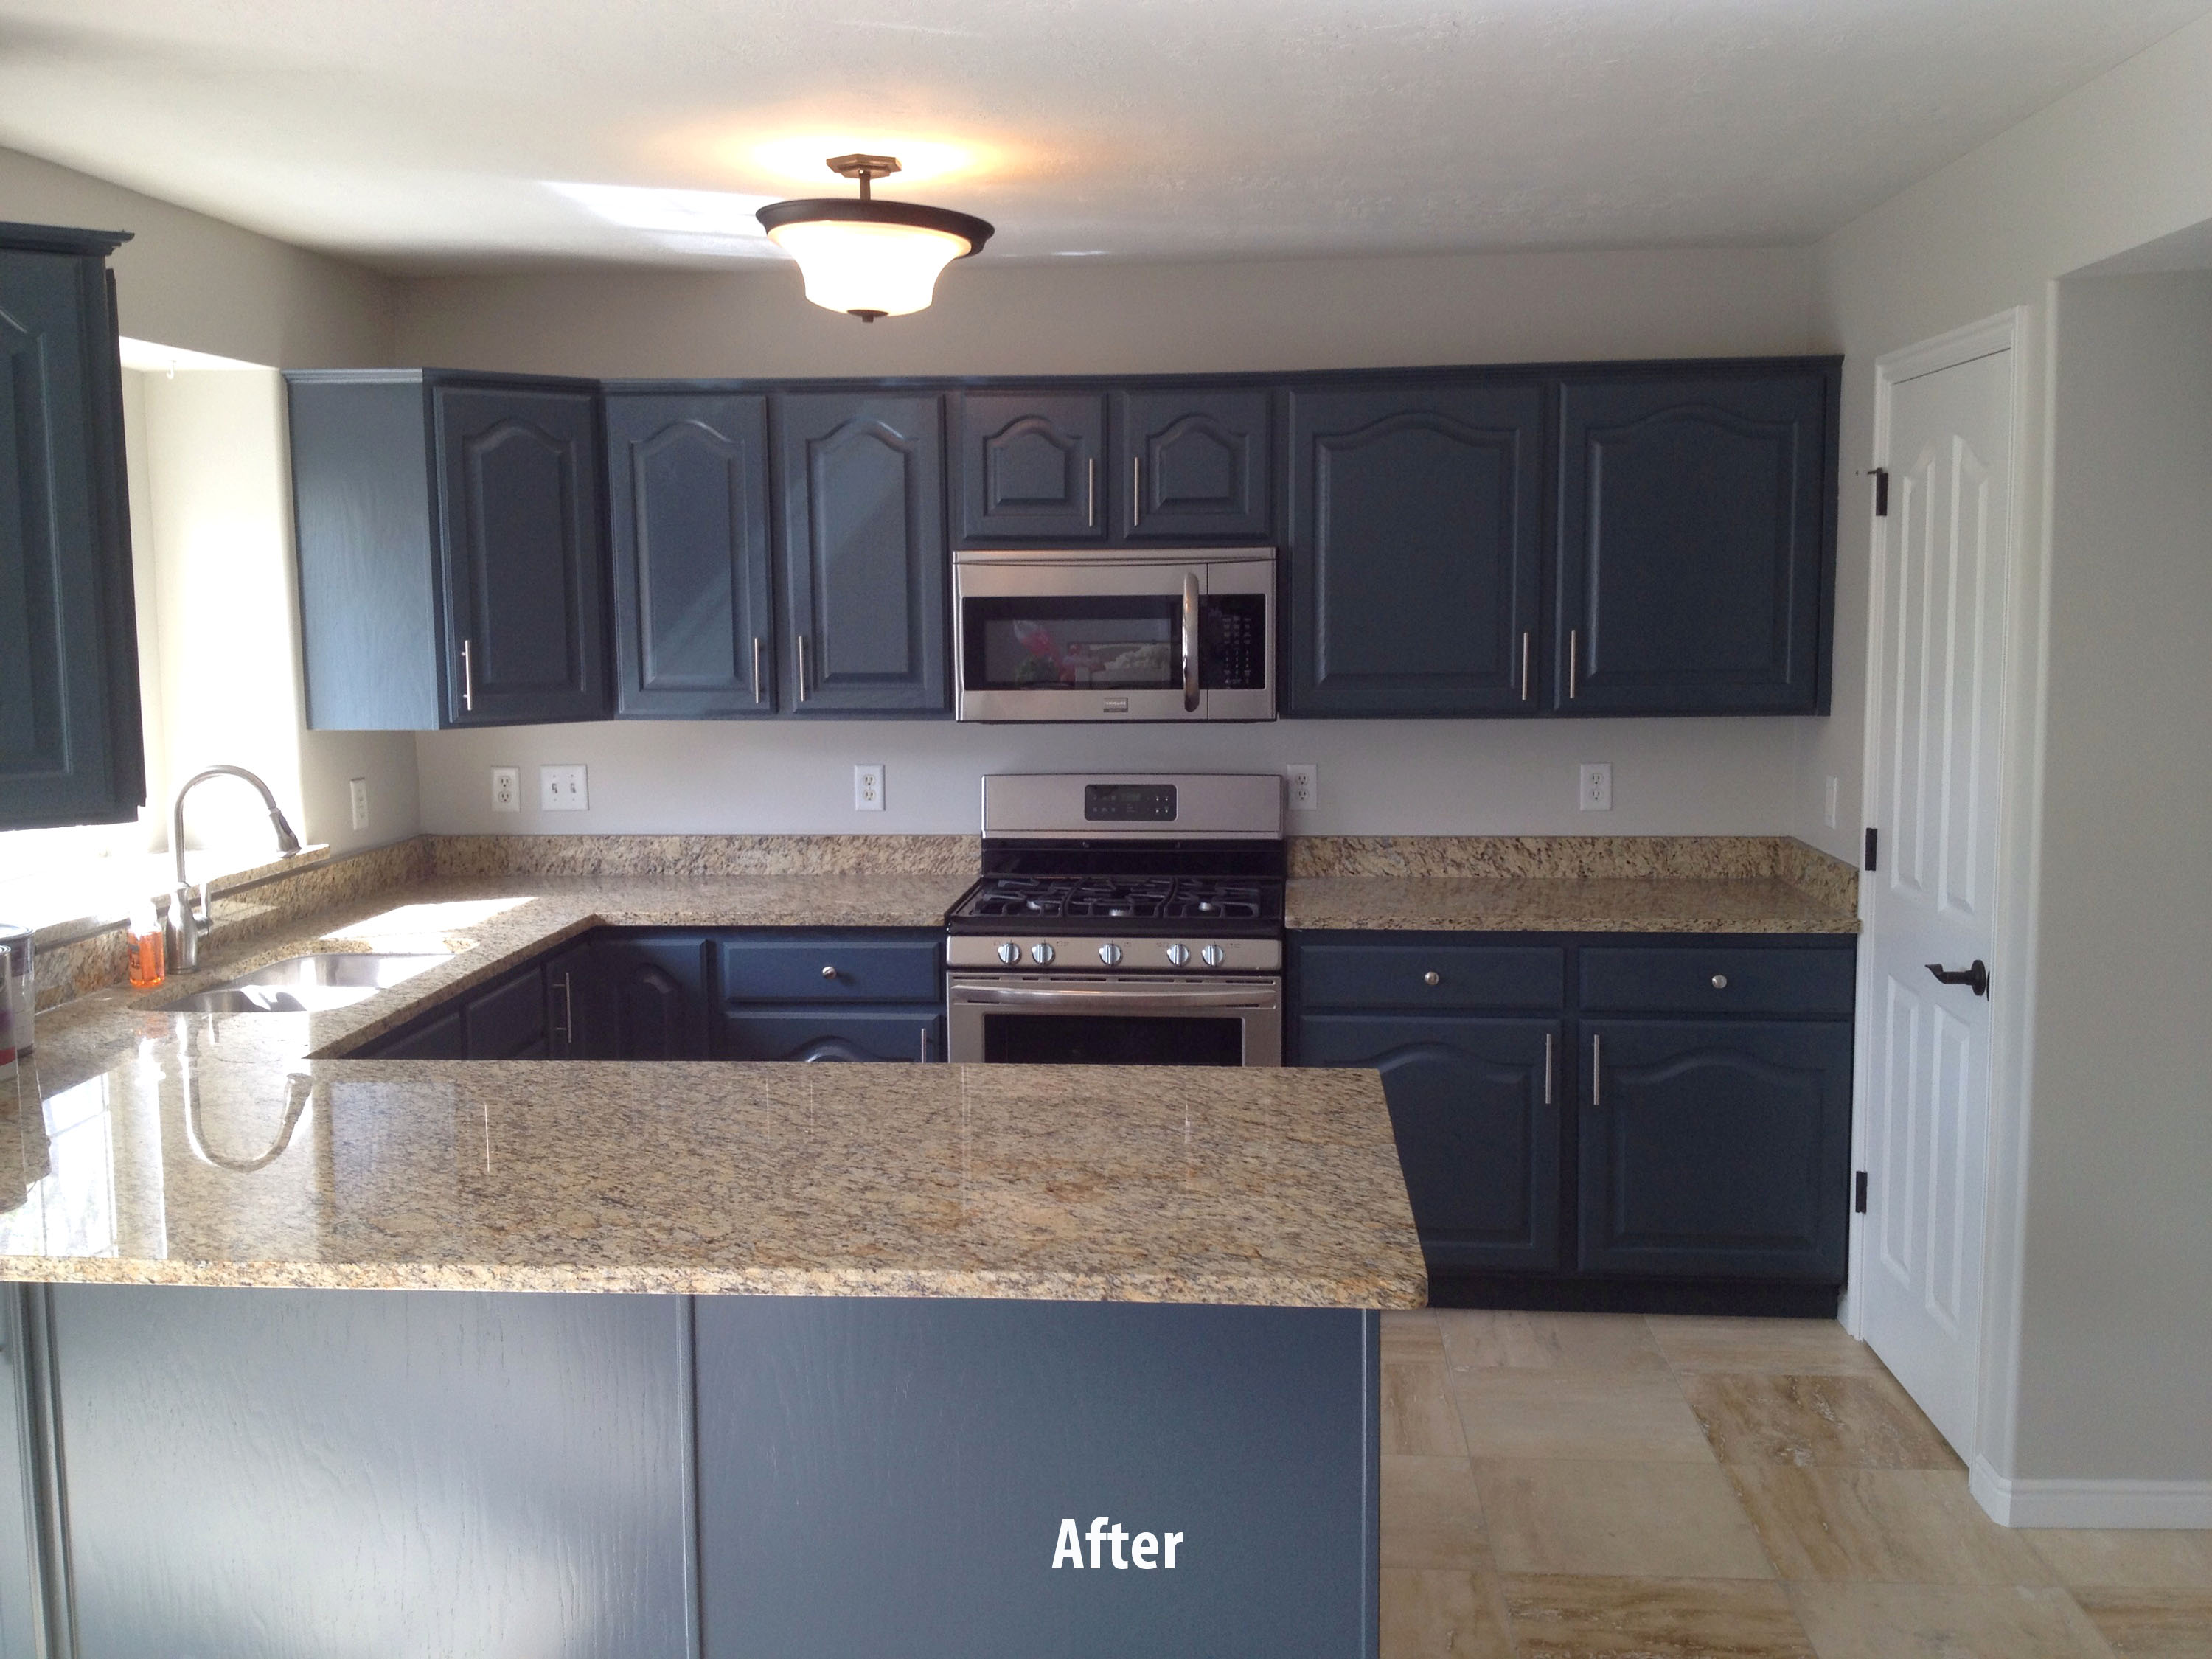 Dark Wood Cabinets Painted To Dark Grey After Painting Whole